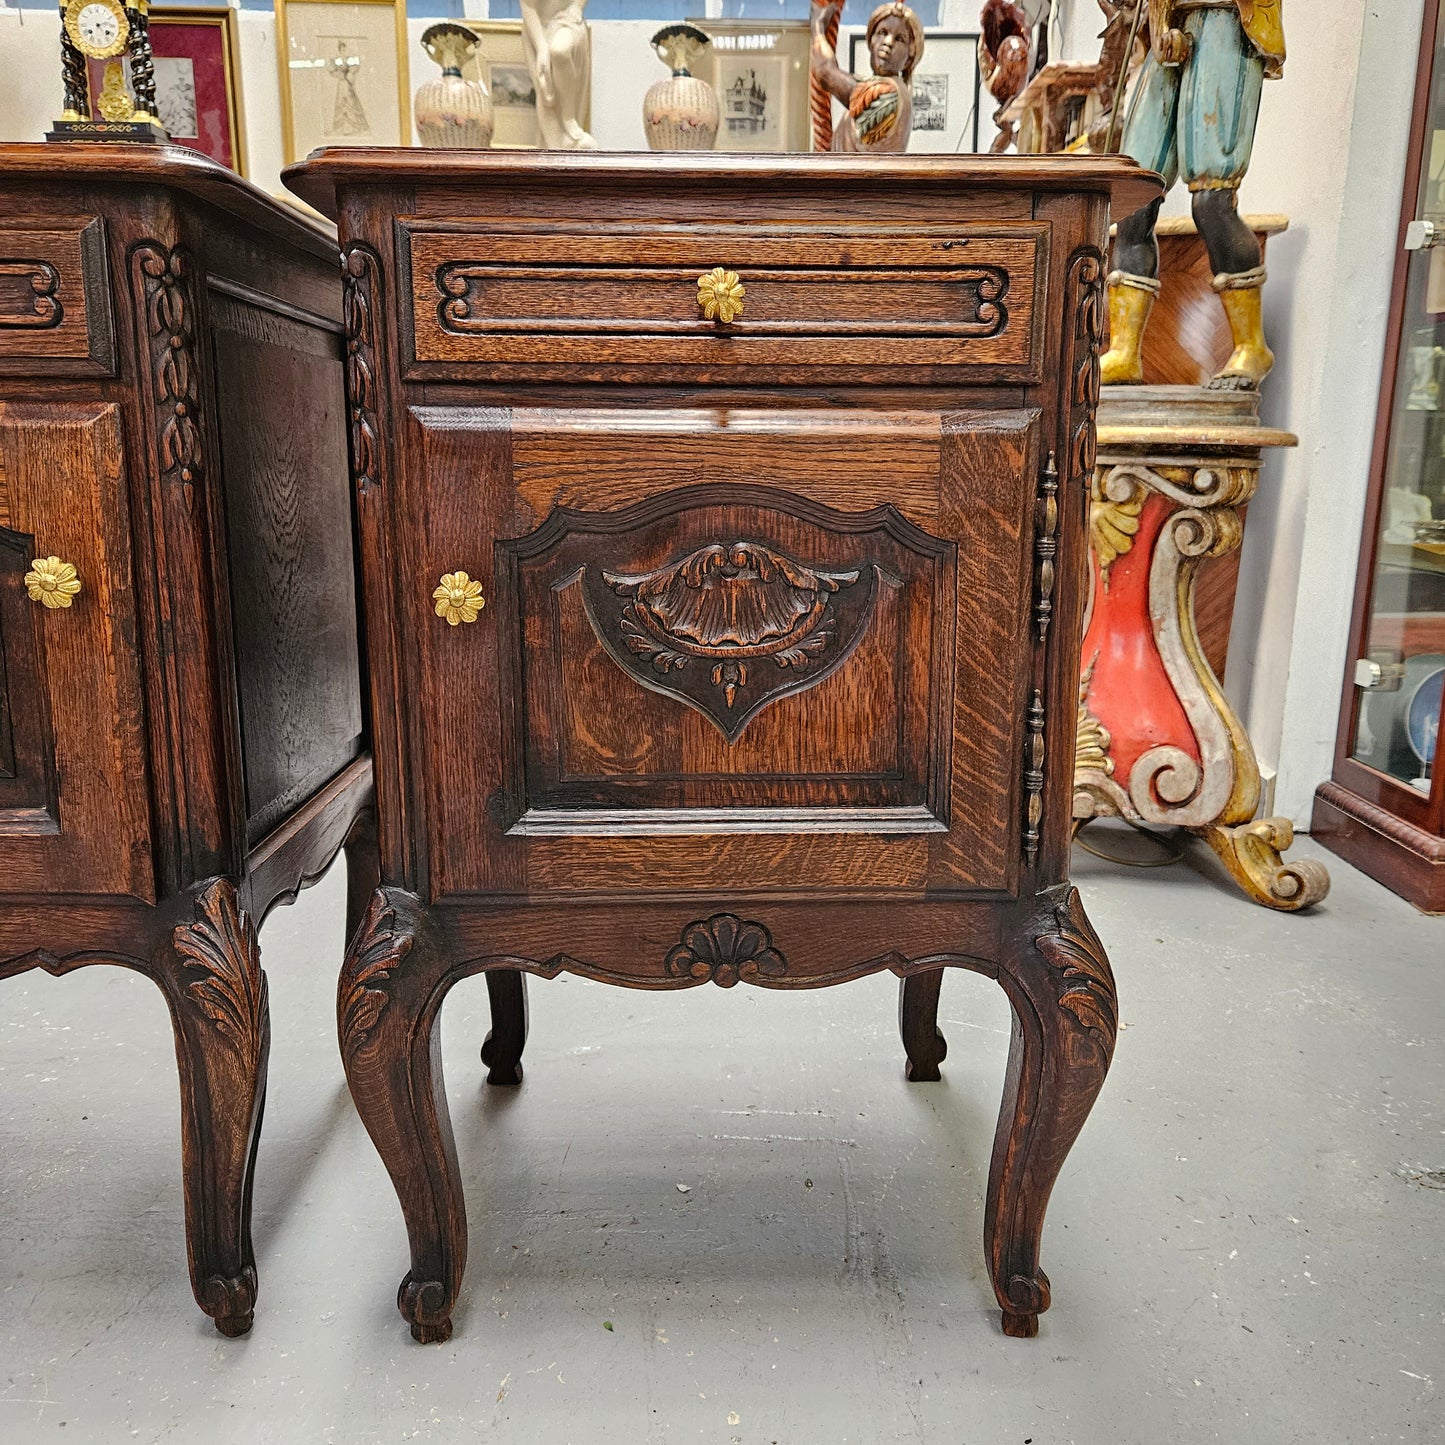 Pair of Hard to Find French Louis XV Style Bedside Cabinets